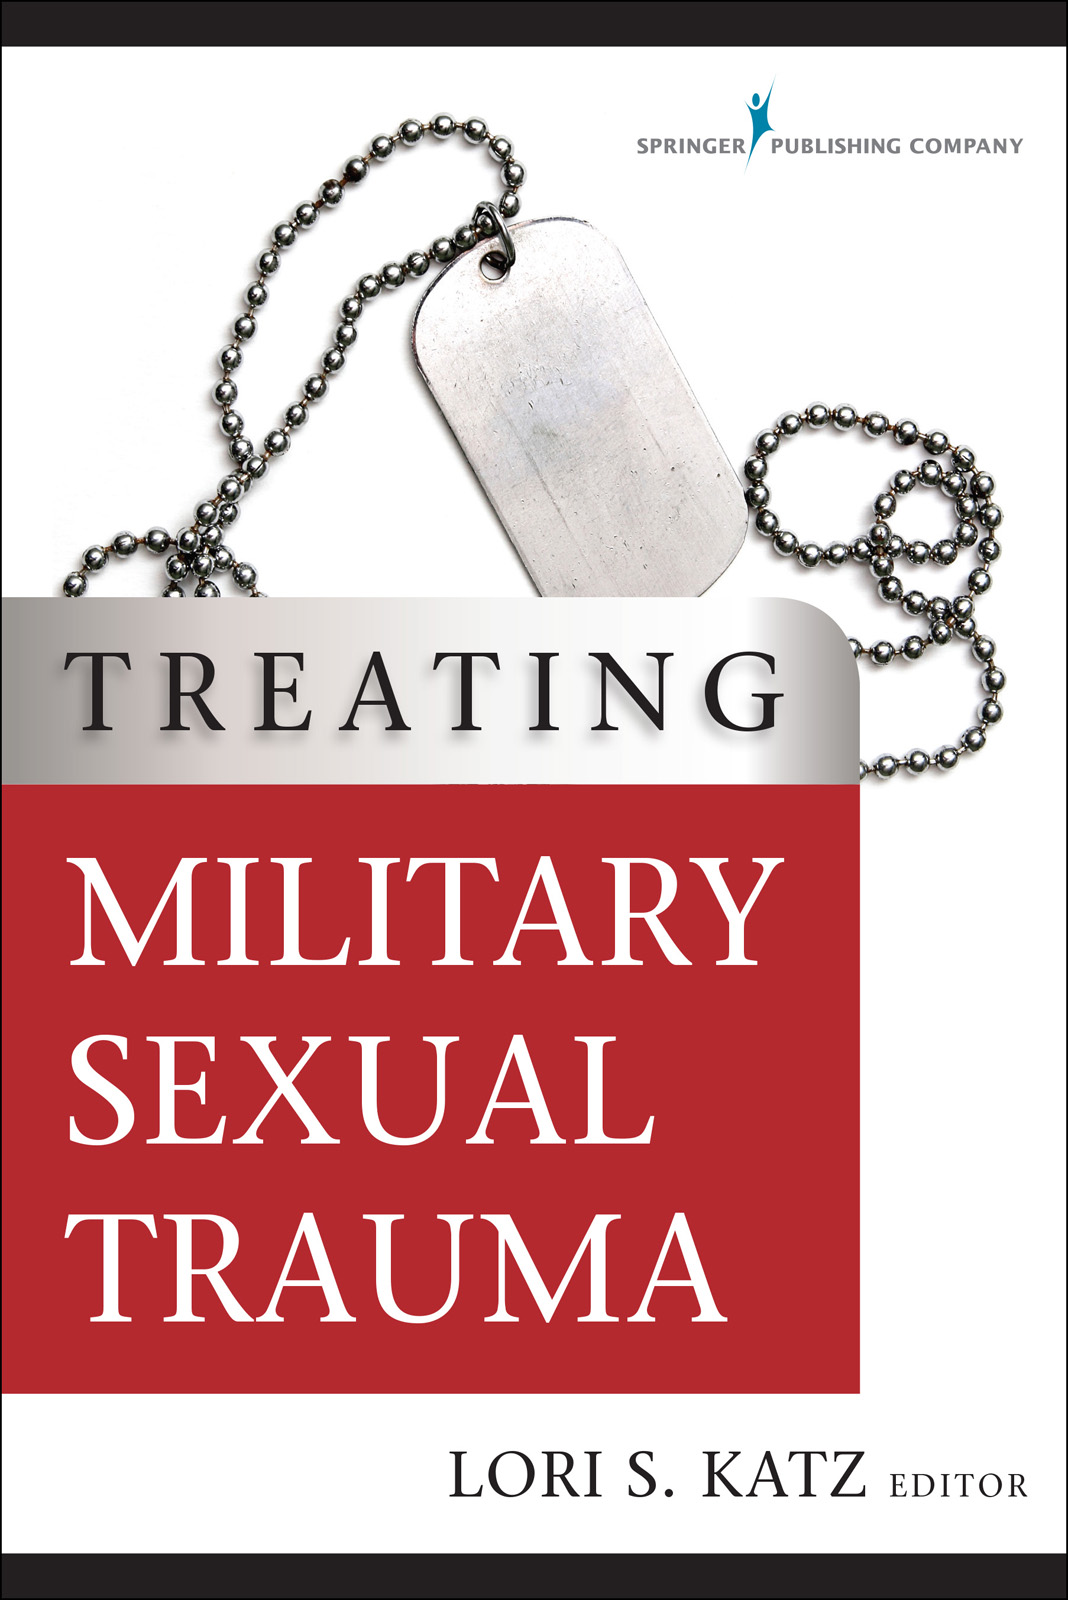 Processes to evaluate, care for military sexual trauma patients improve